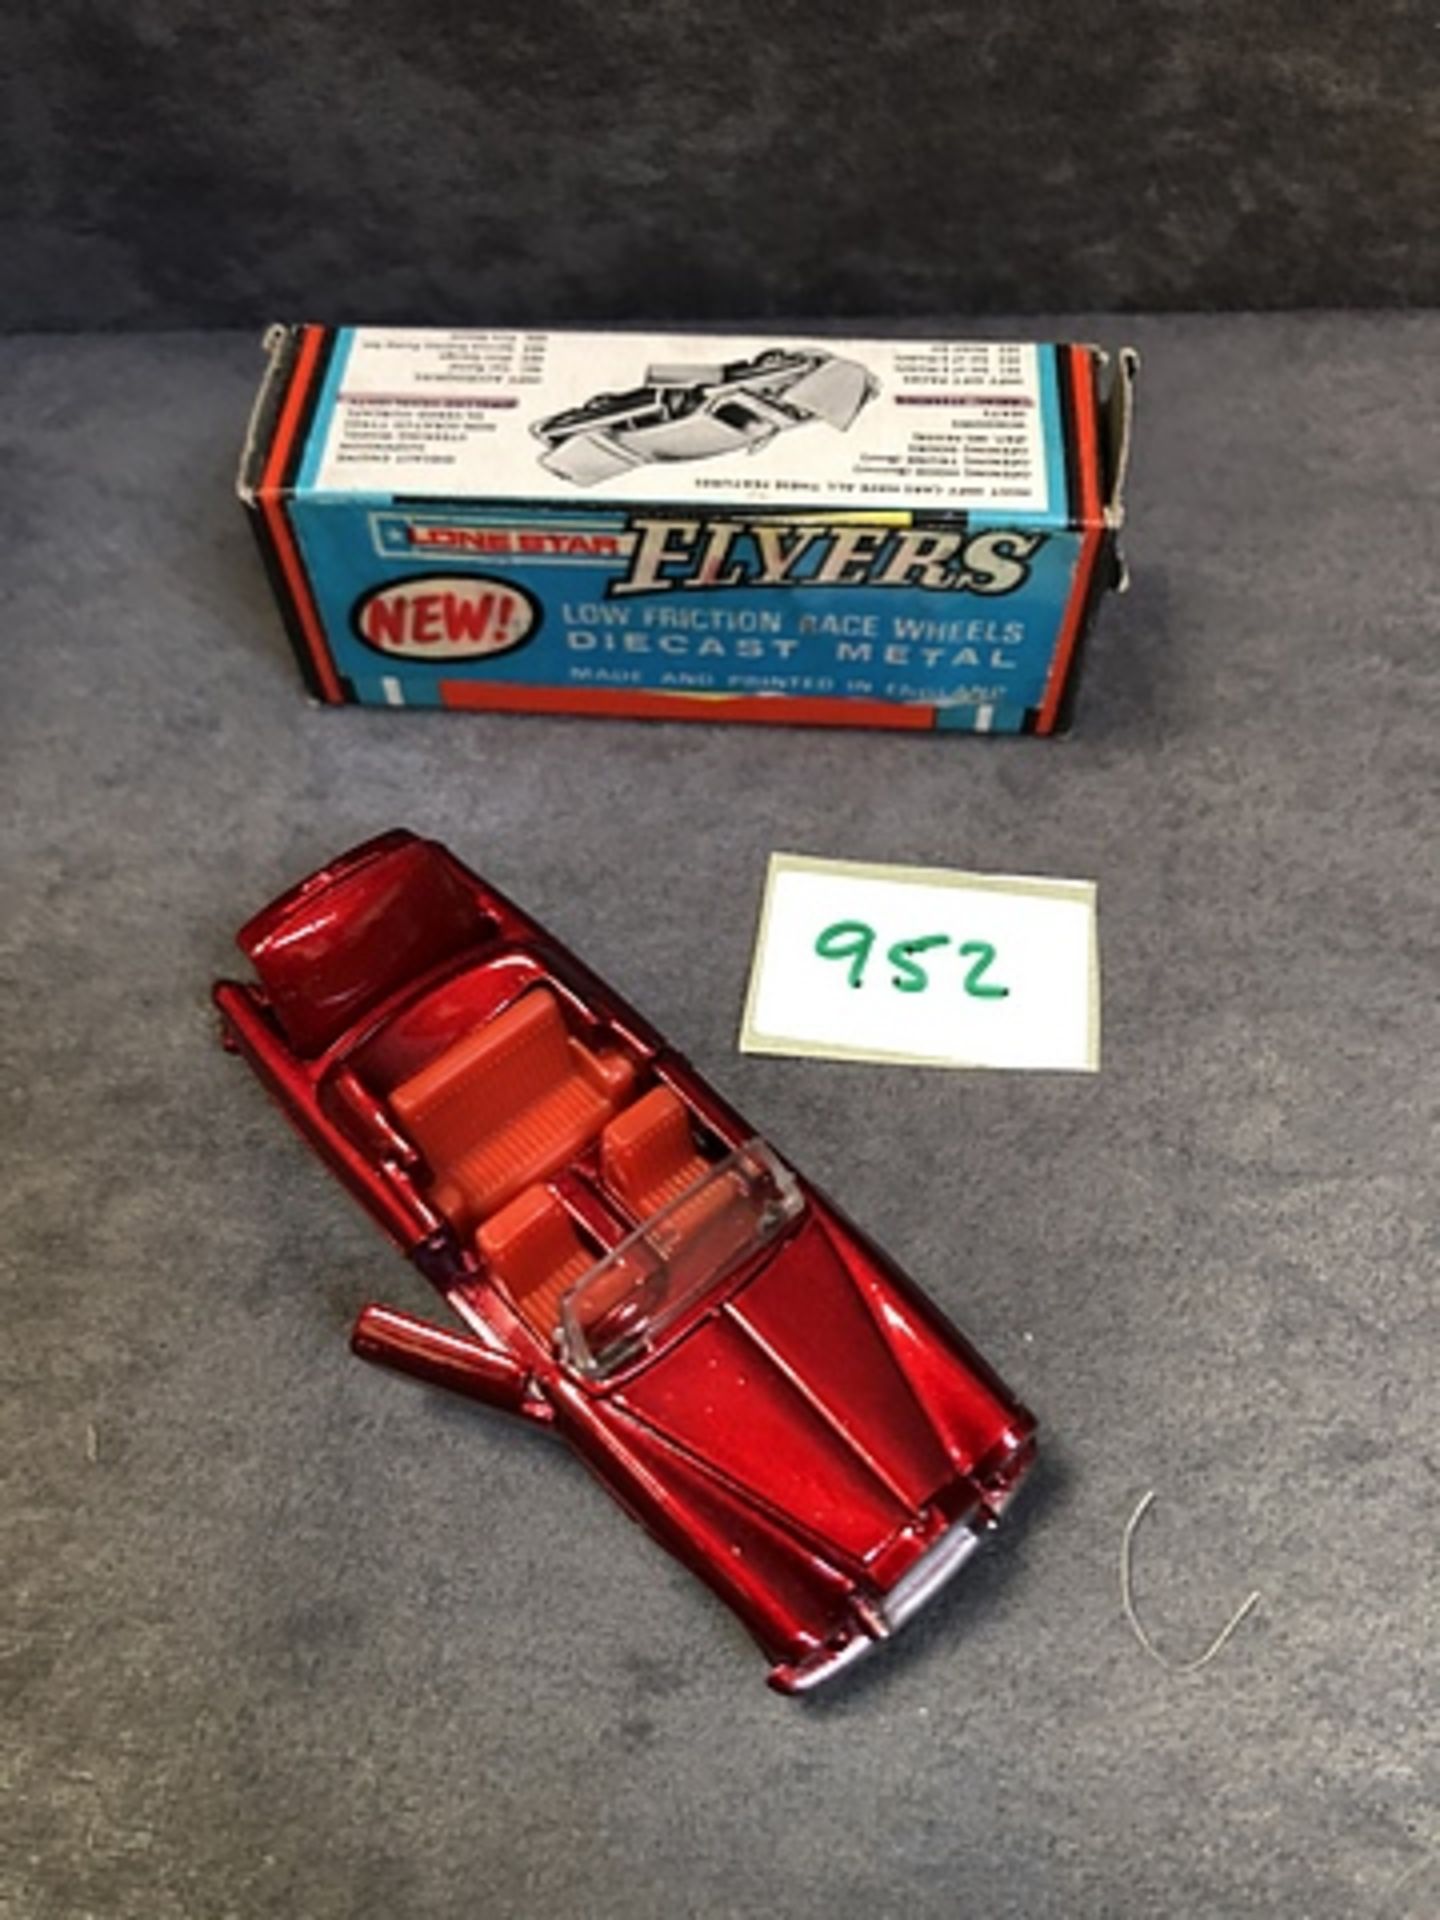 Lone Star Impy Roadstar #22 Rolls Royce Silver Cloud III In Red Complete With Box - Image 2 of 2